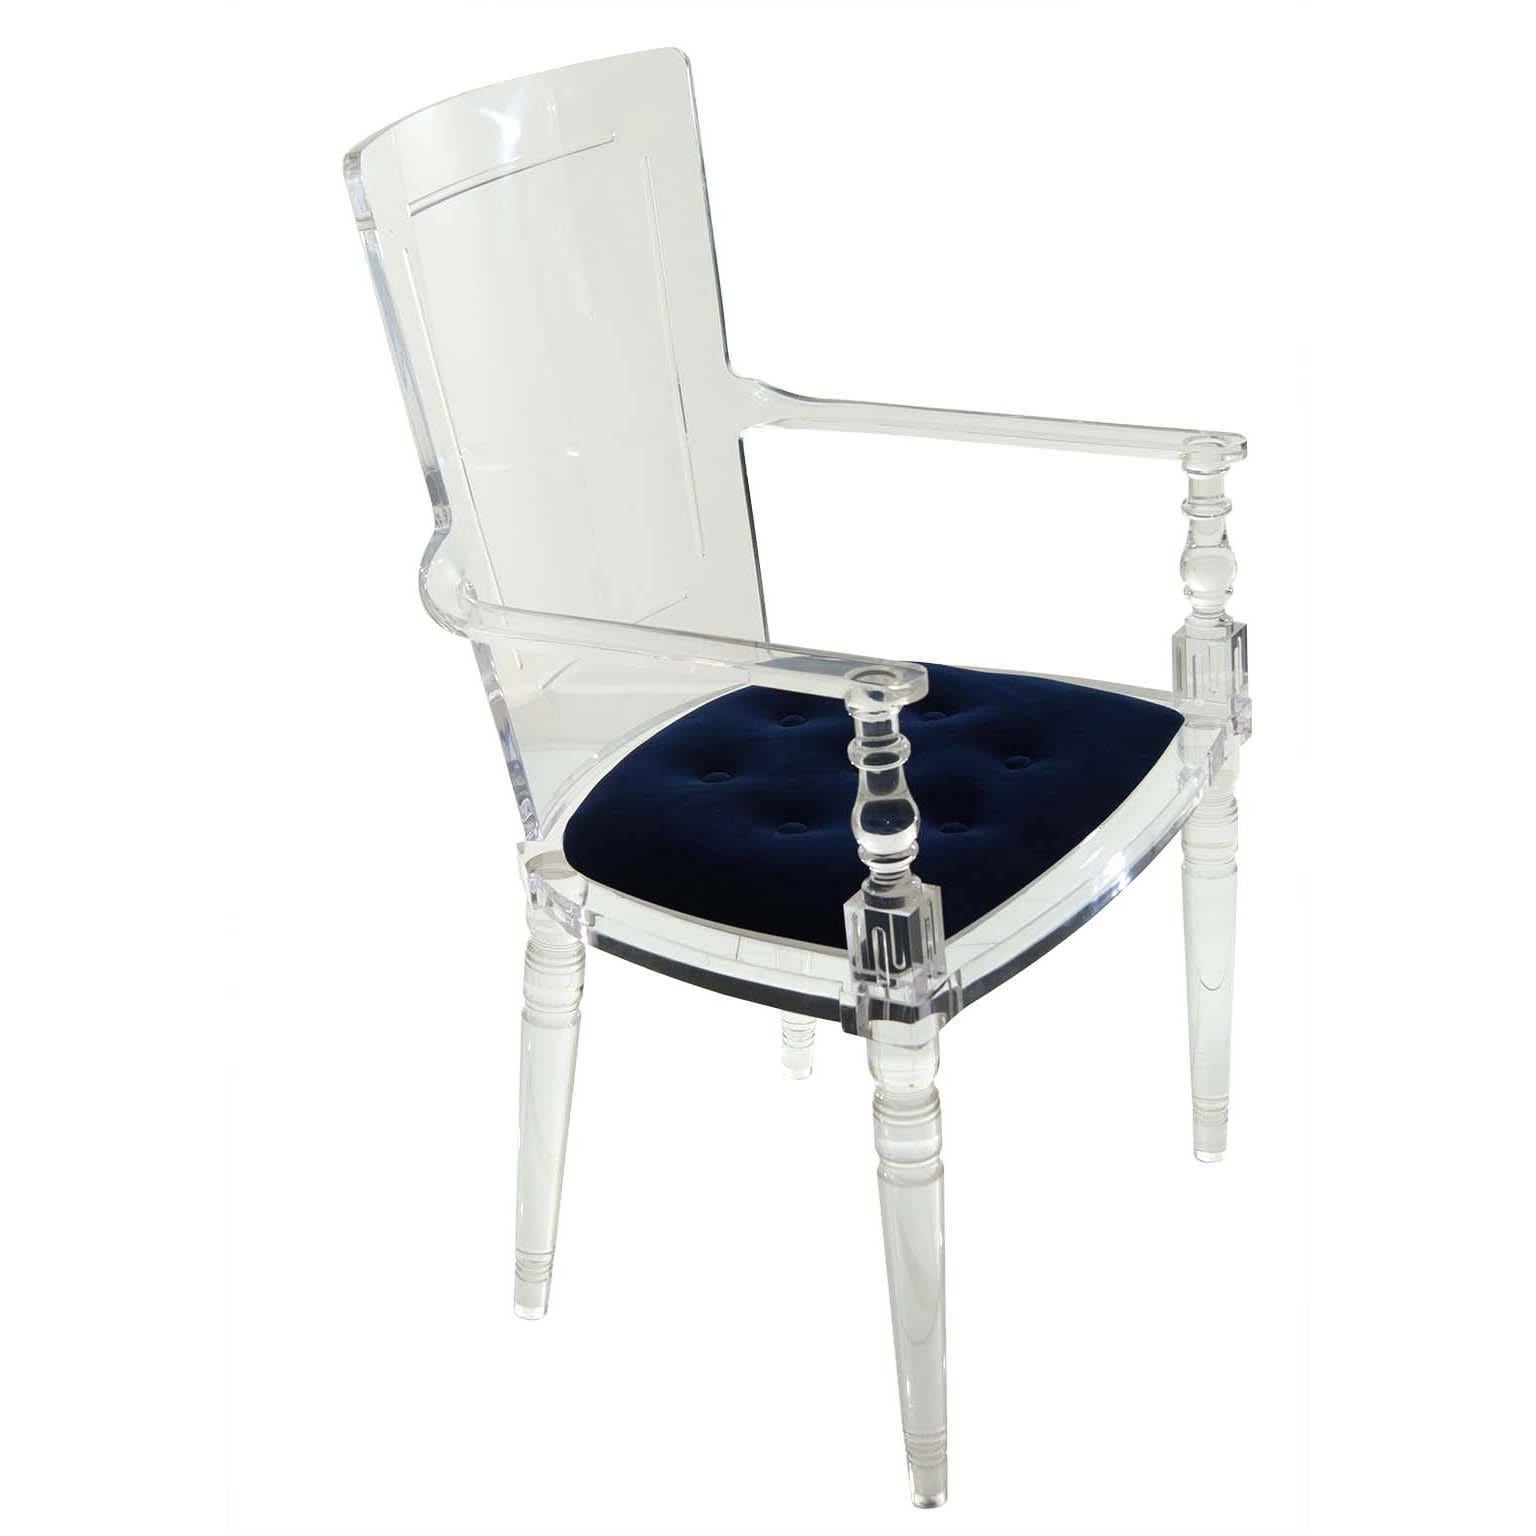 Modshop's Juliette Lucite dining chair with navy velvet
Measures: 19